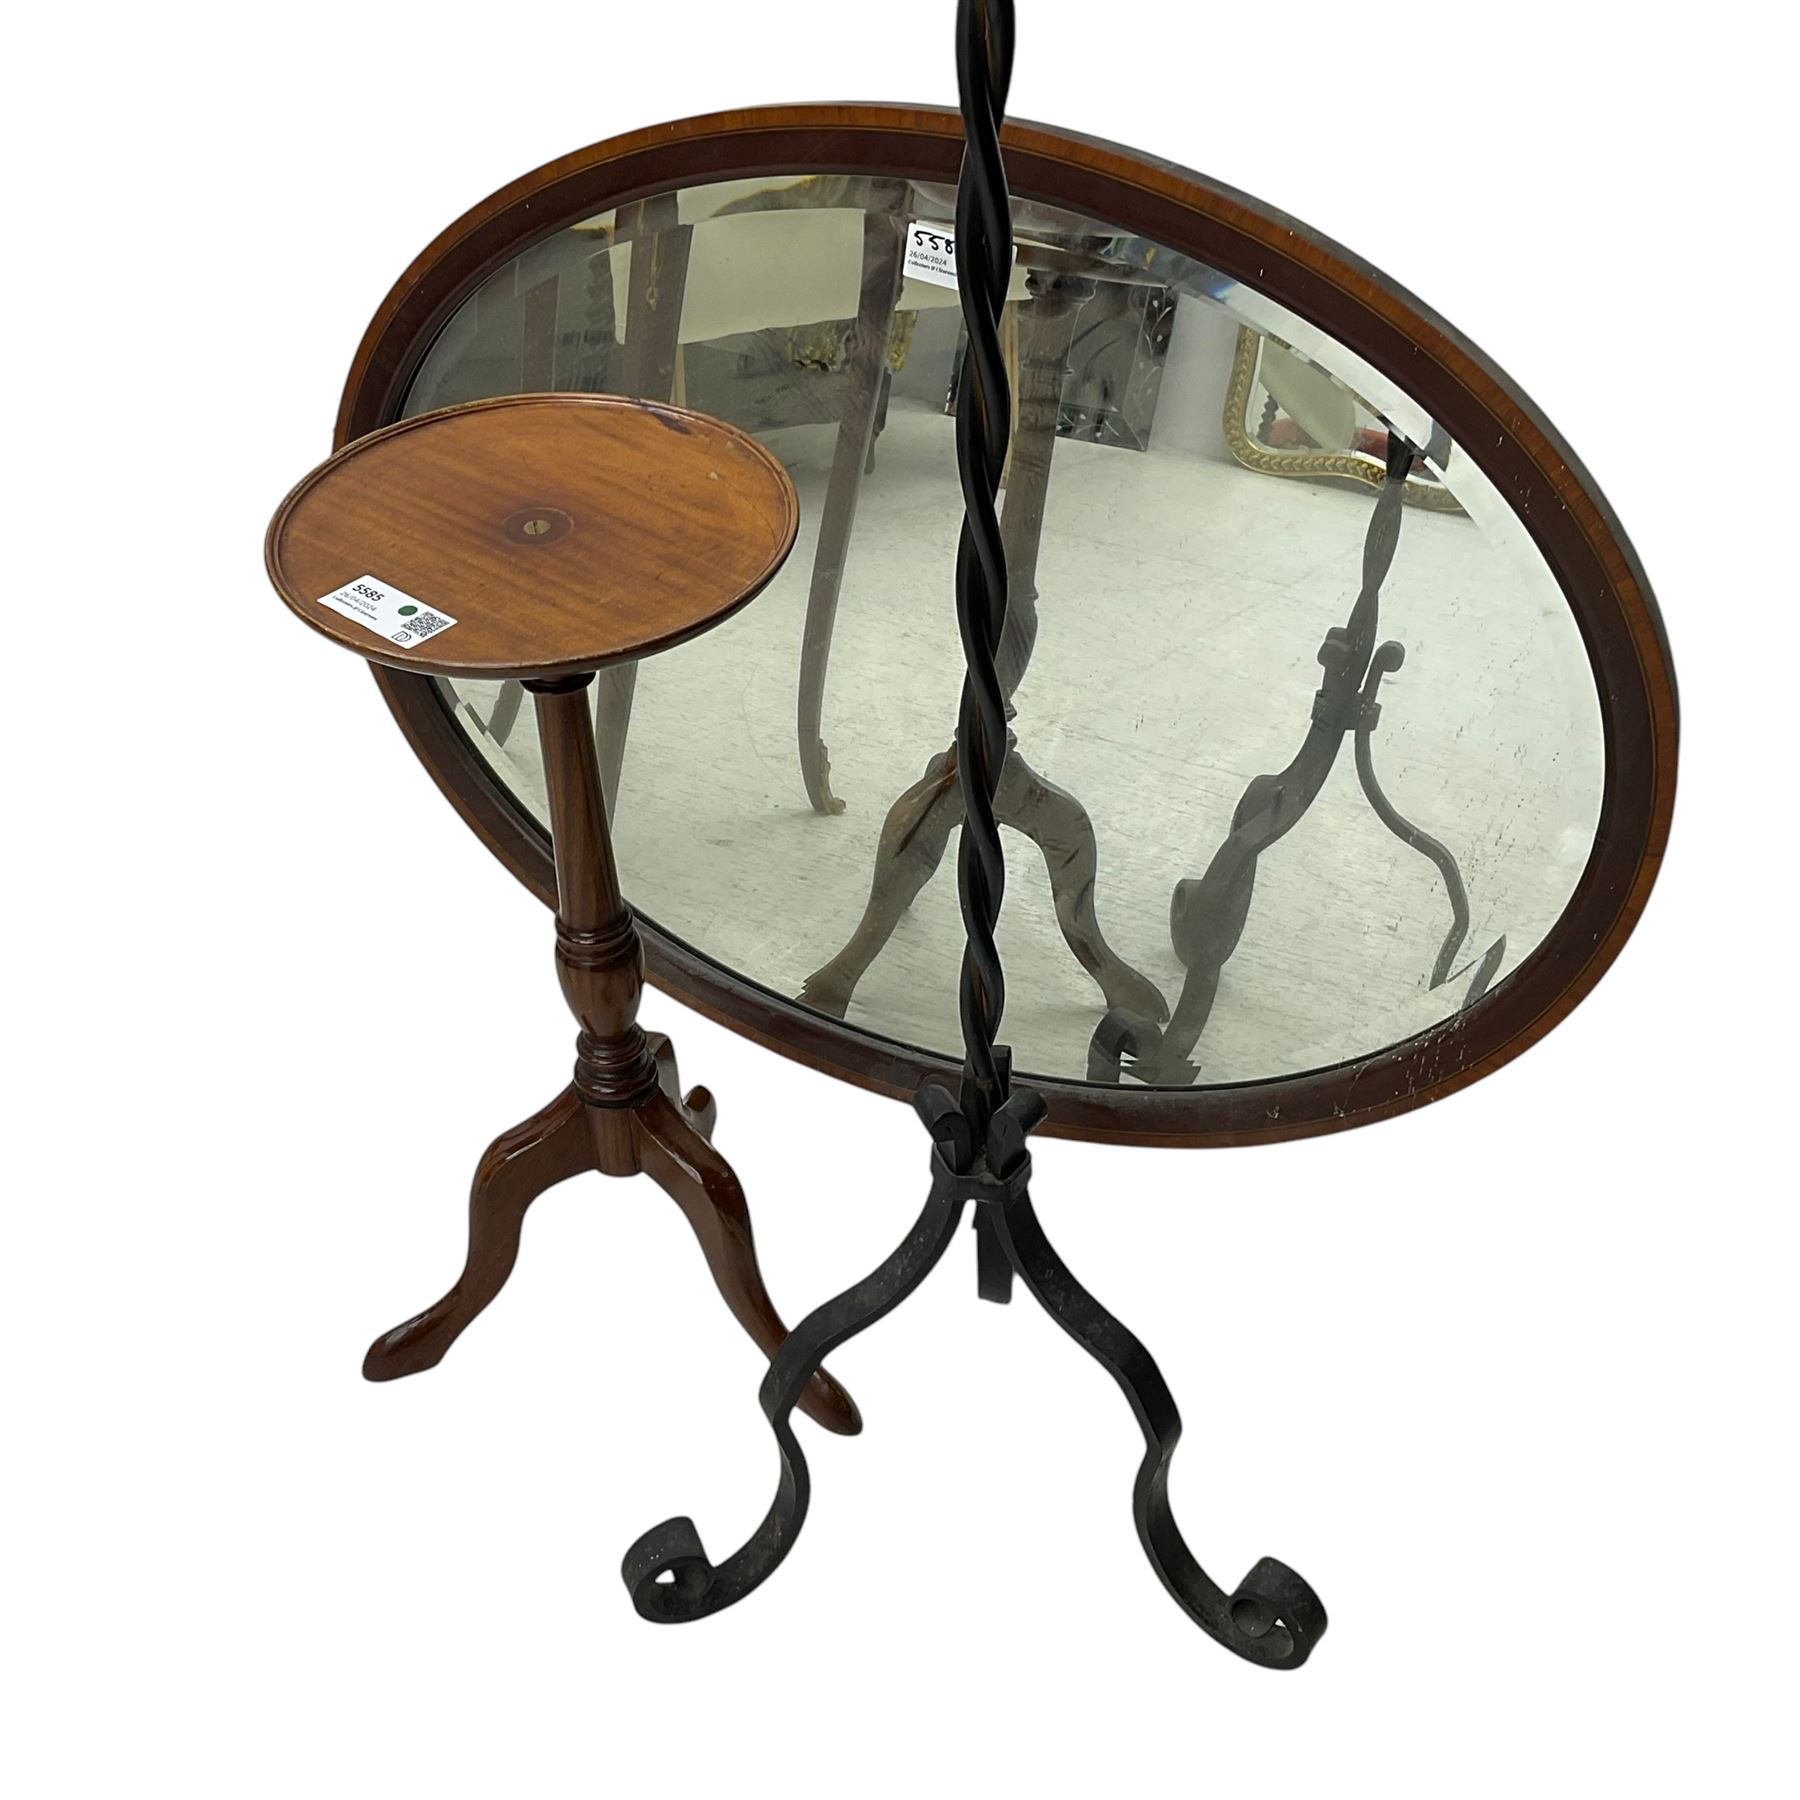 20th century cabriole leg stool; heart shaped bijouterie cabinet; wrought metal candle stand; small - Image 6 of 6